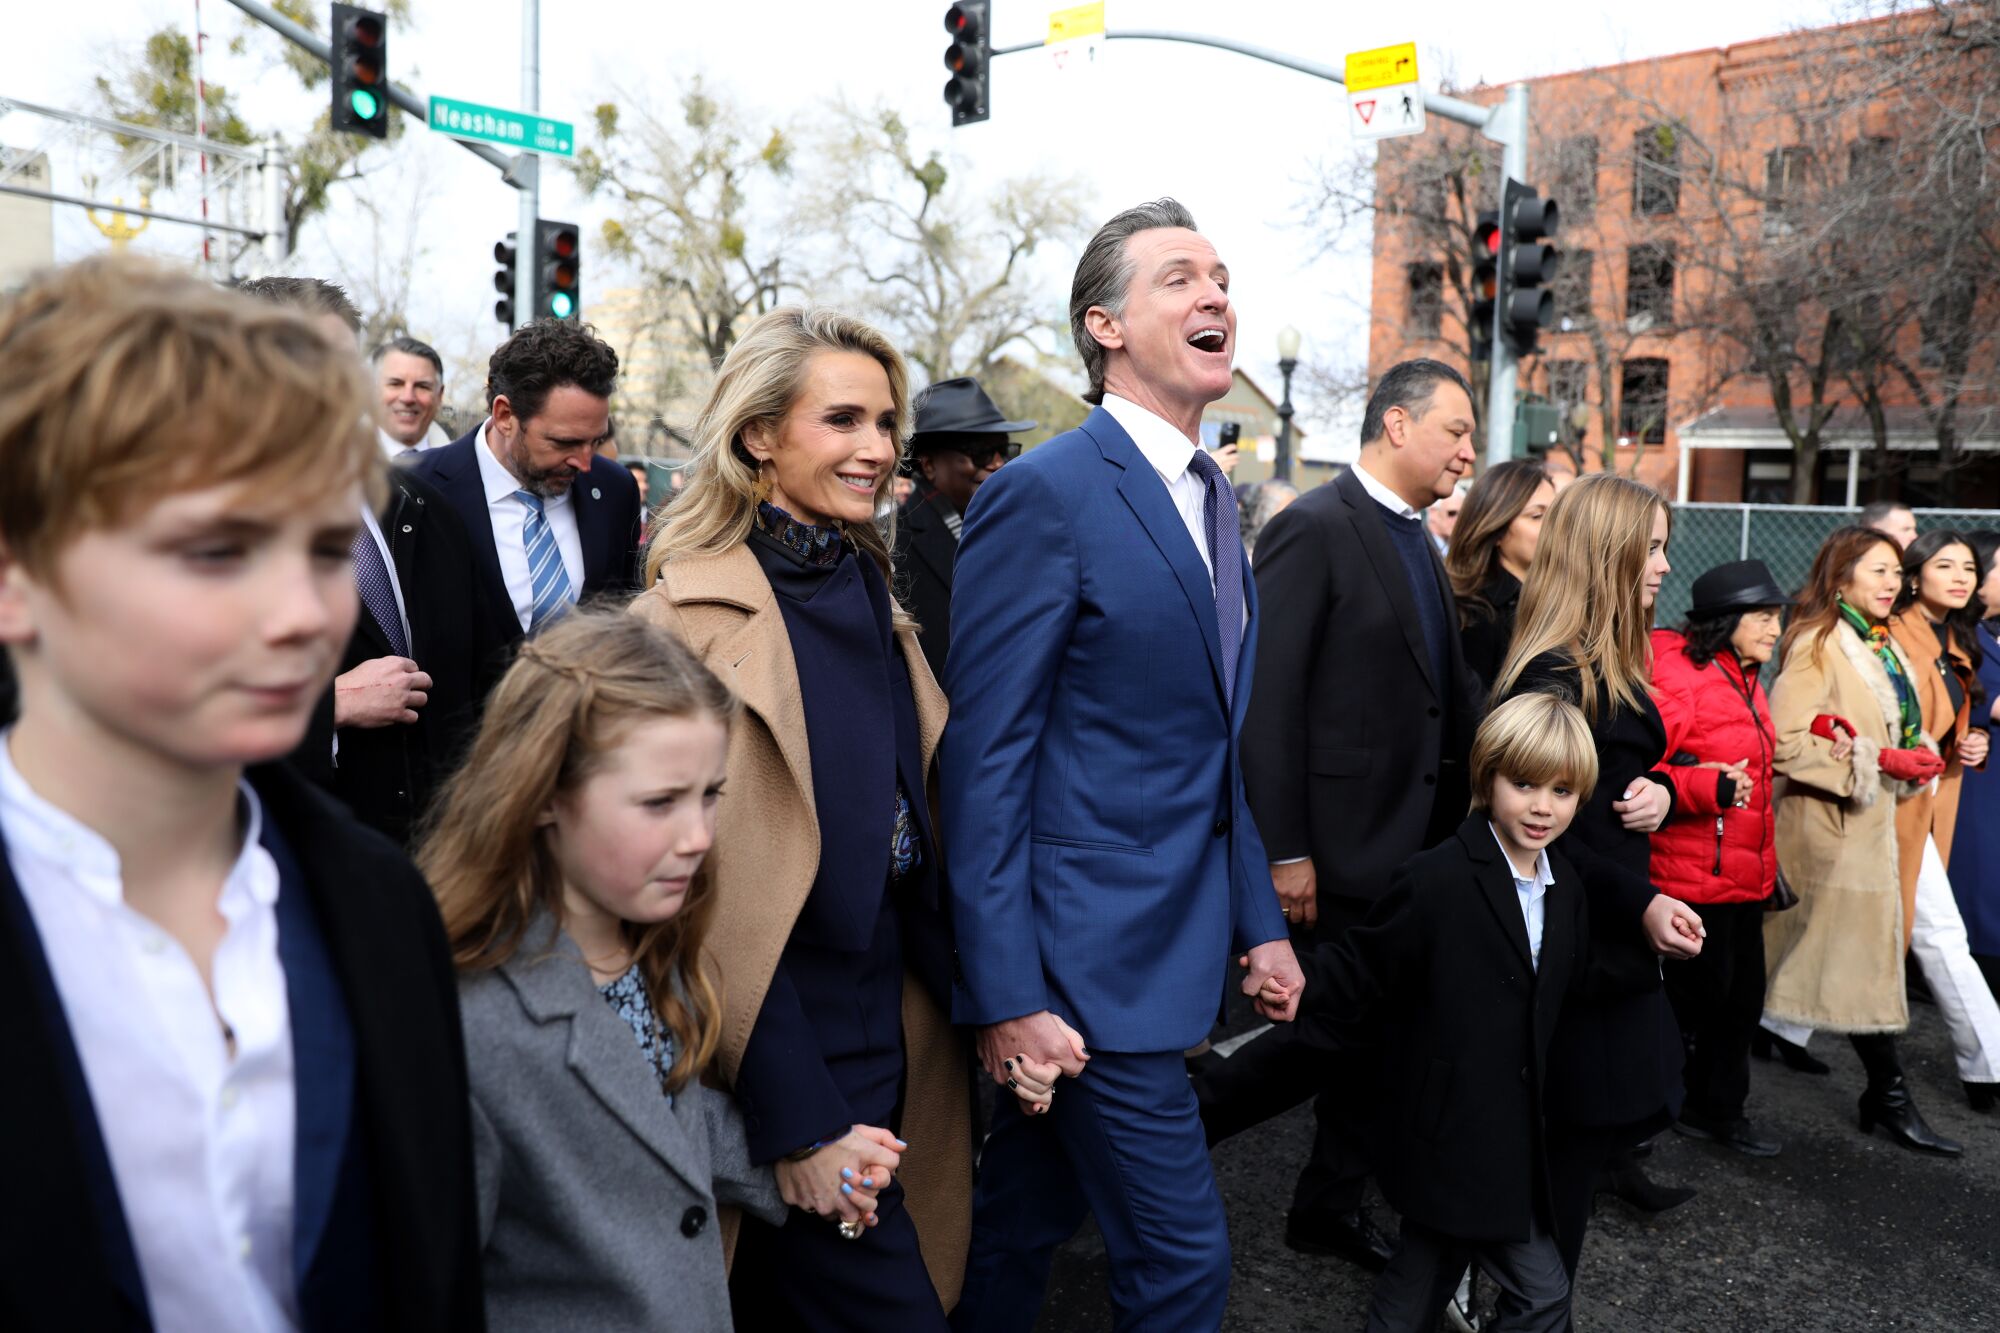 Governor Gavin Newsom and his family walk with a crowd holding hands.